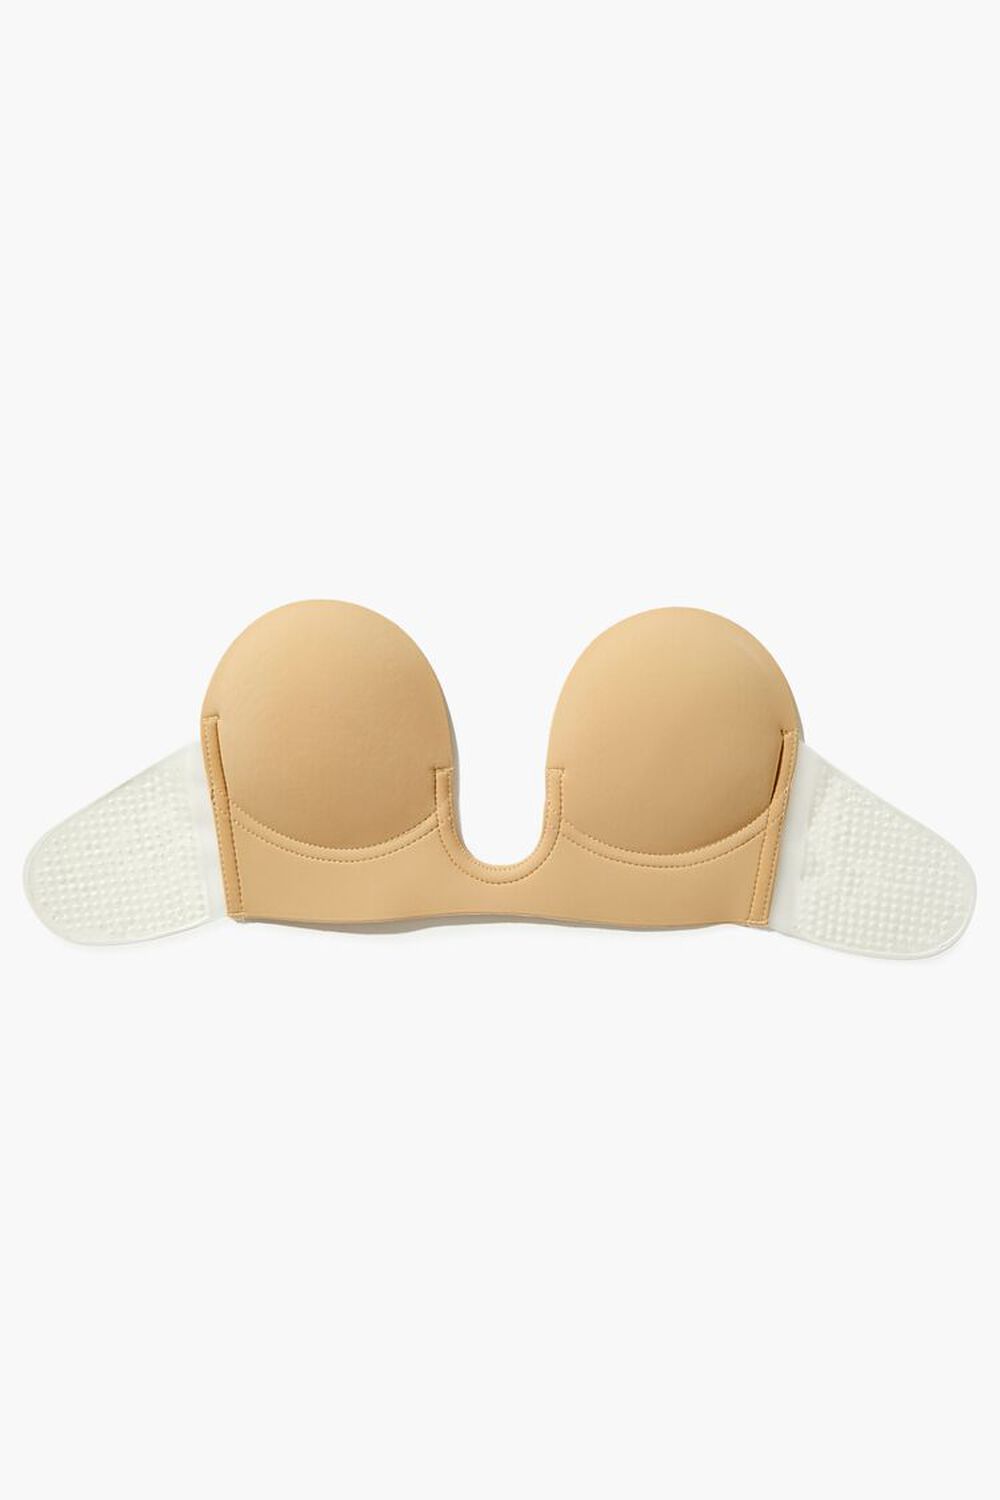 NUDE Reusable Plunging Strapless Bra, image 1